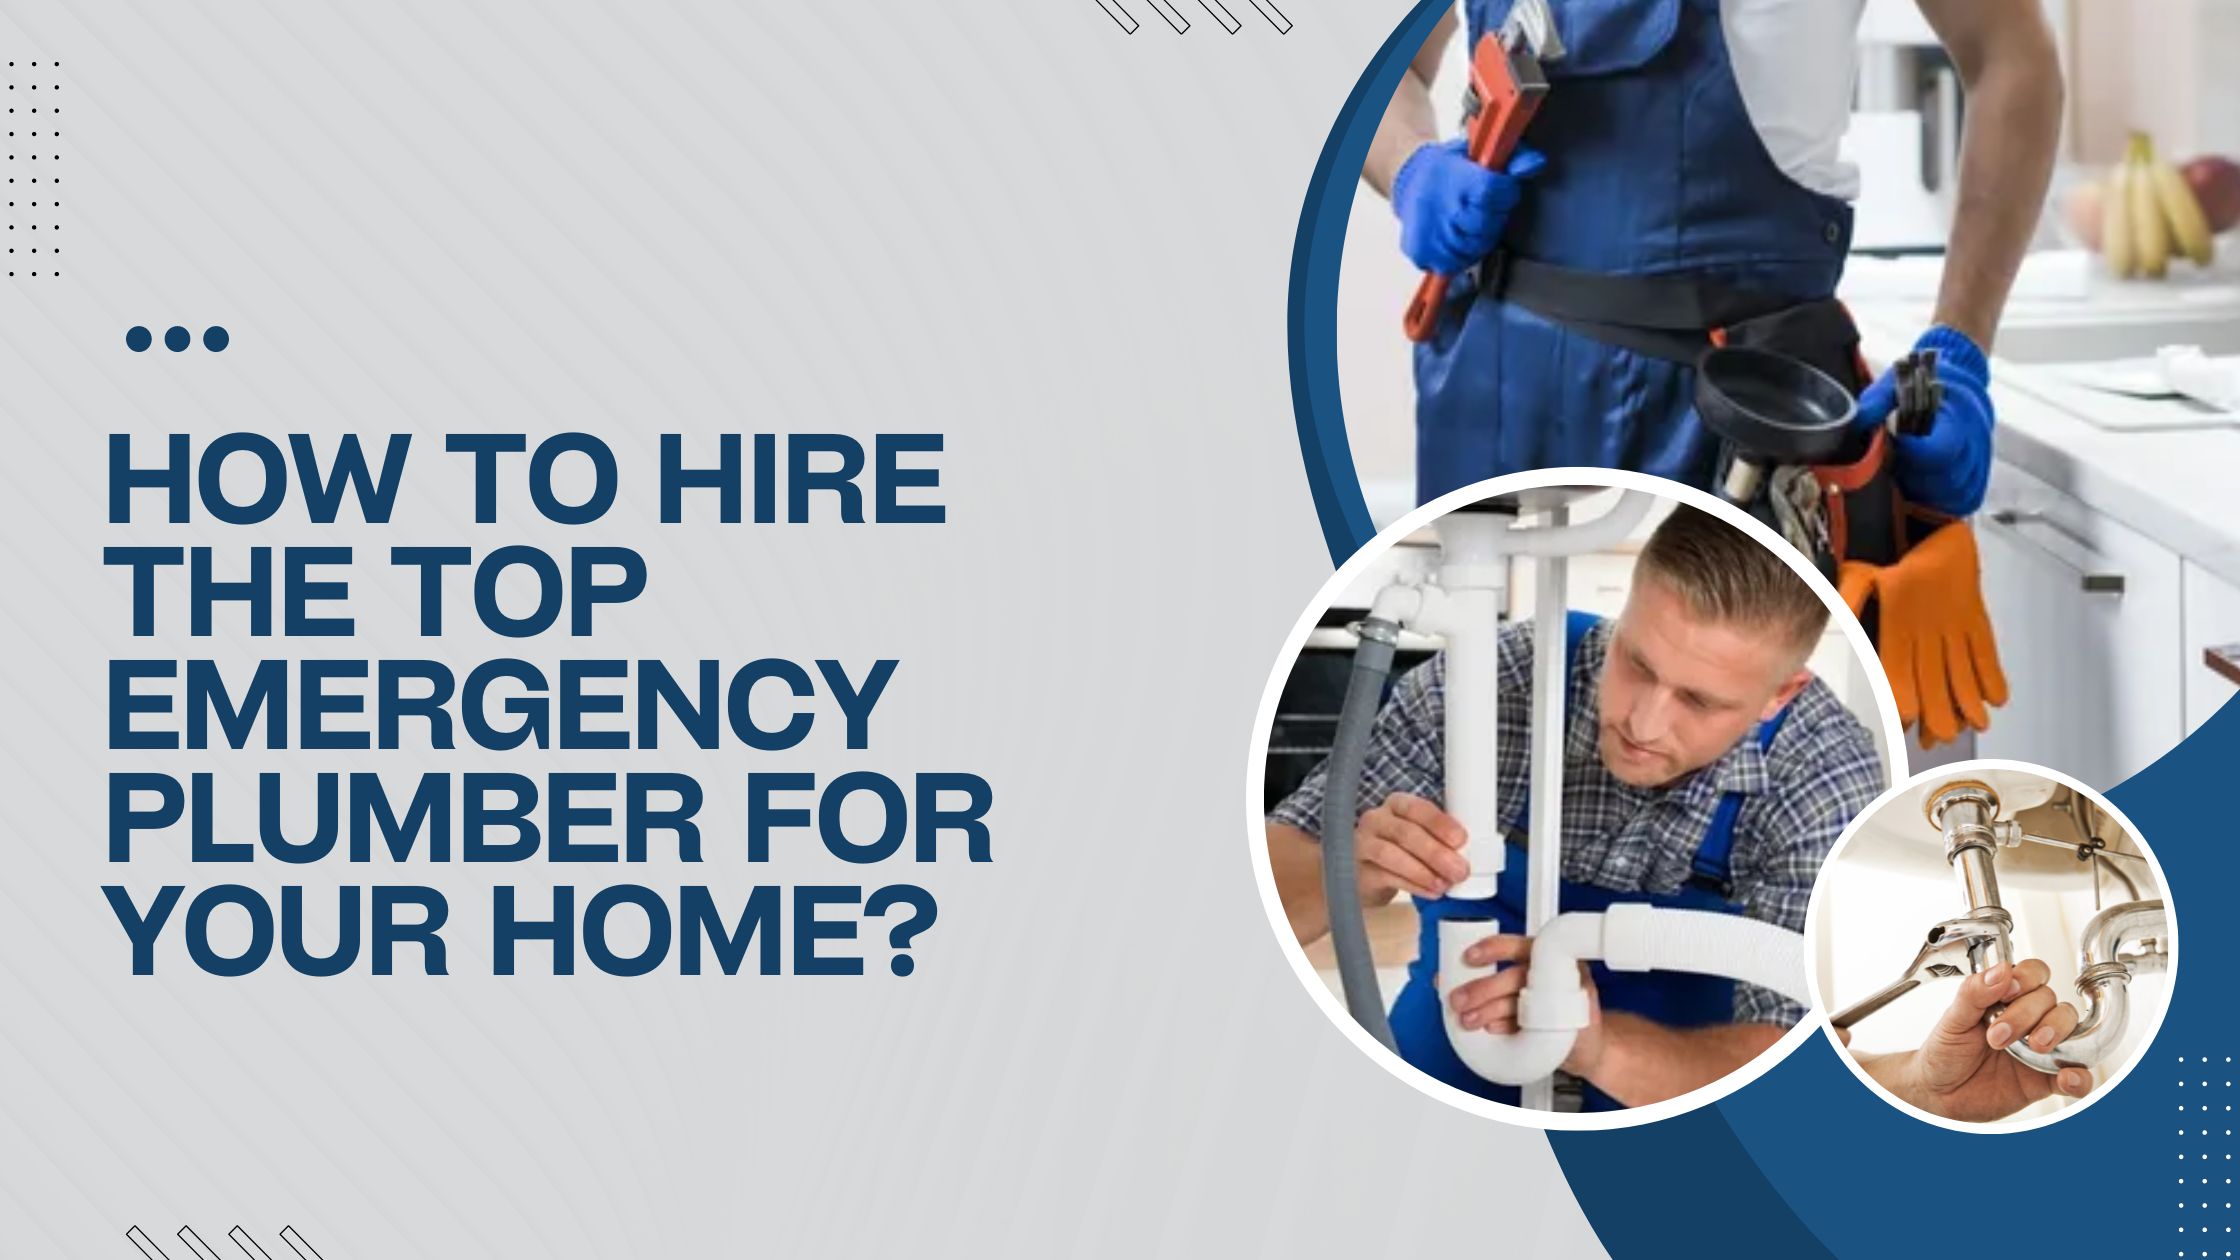 How To Hire The Top Emergency Plumber For Your Home